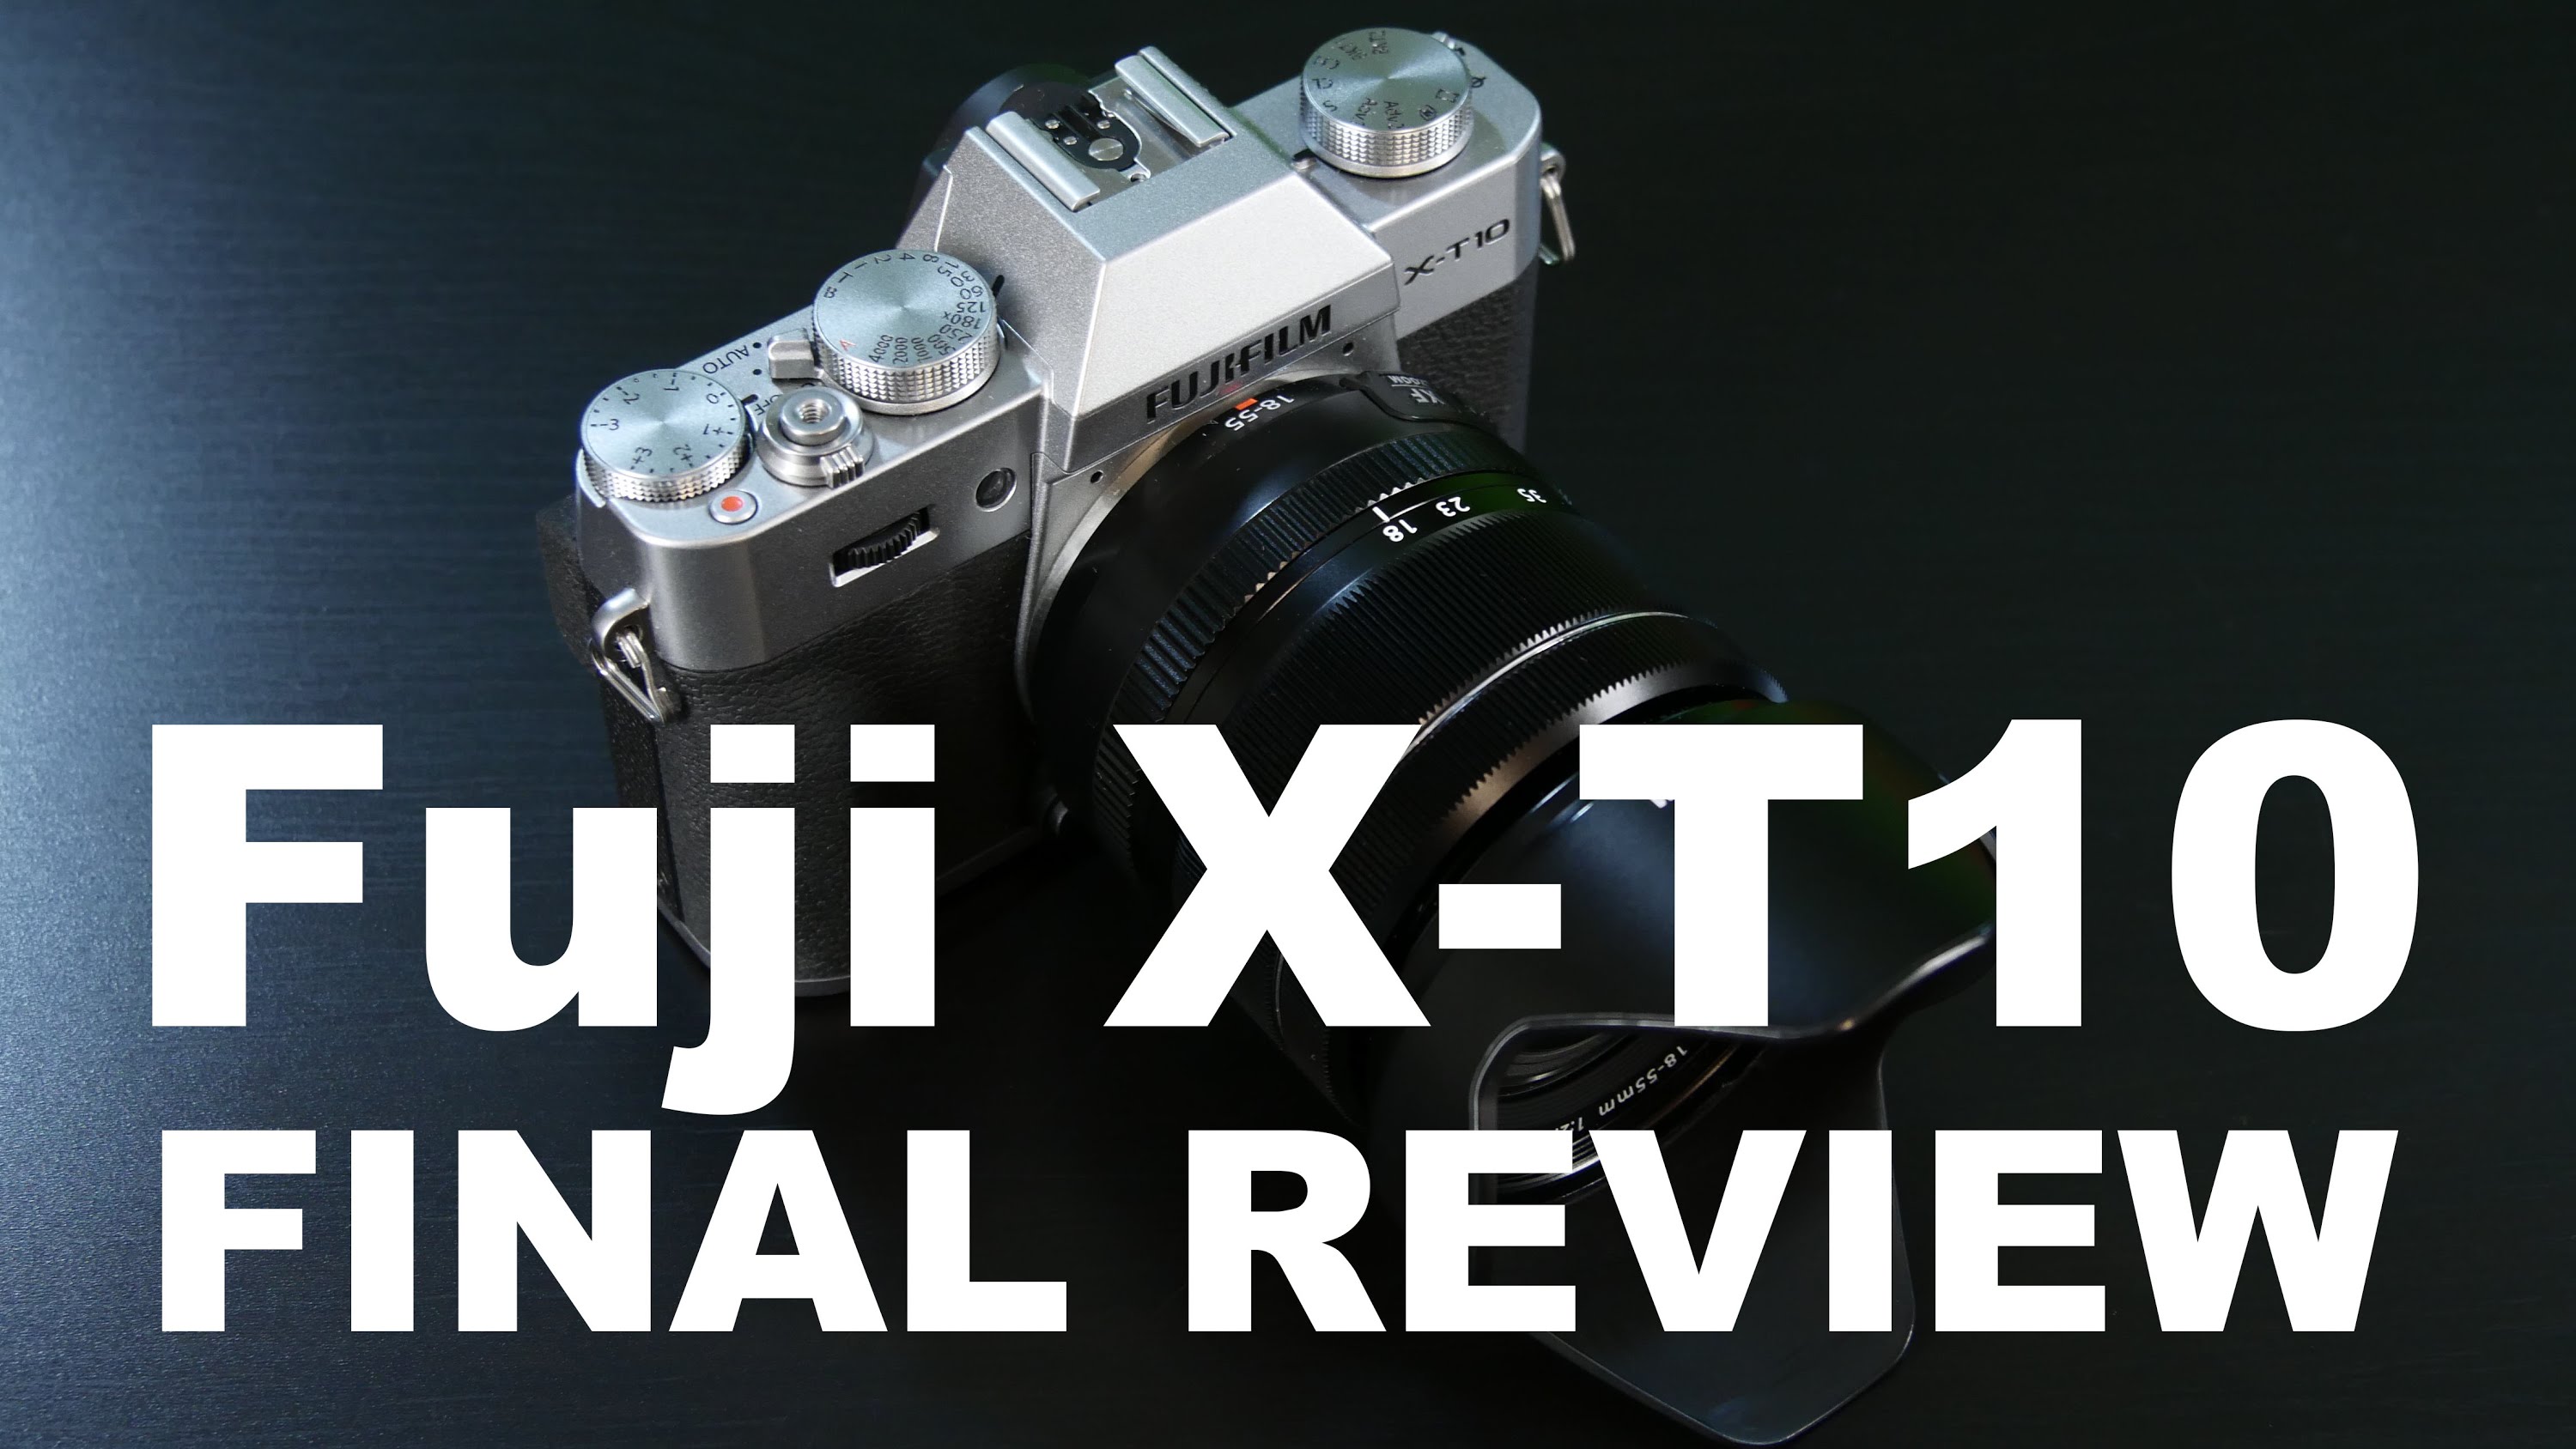 Fuji X-T10: Final Hands On Review after a few weeks of Shooting the Fujifilm X-T10